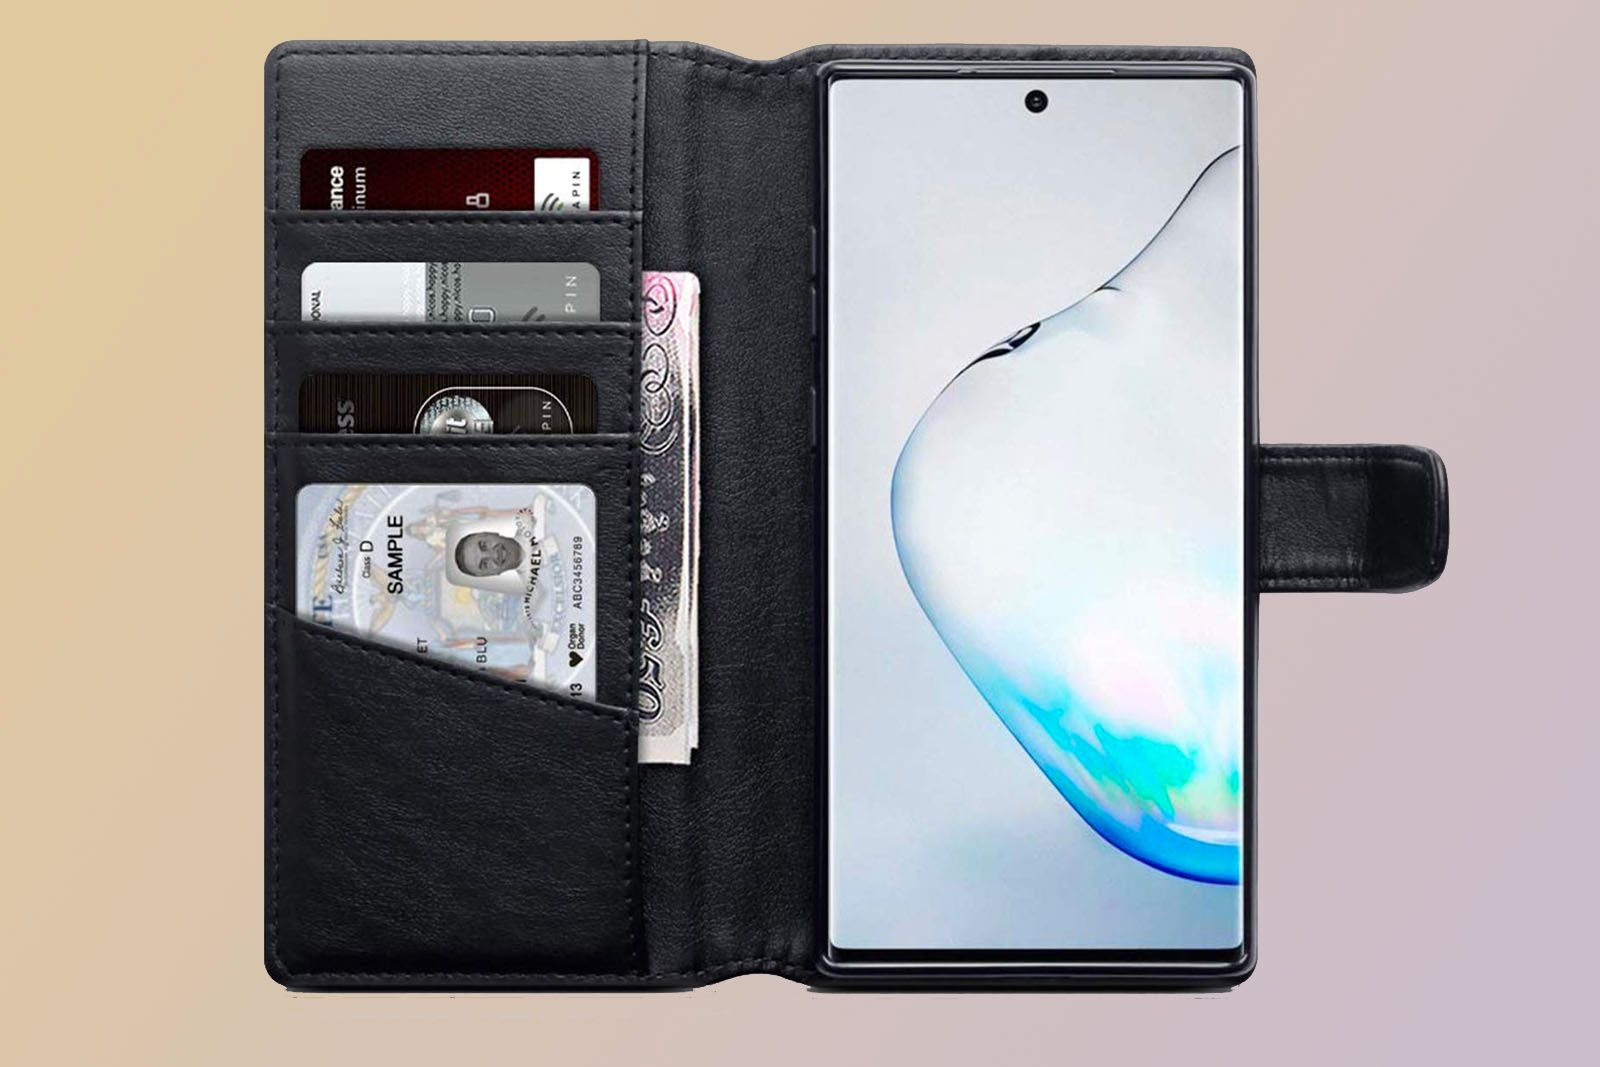 Best Note 10 And Note 10 Cases Protect Your New Samsung Phone image 6